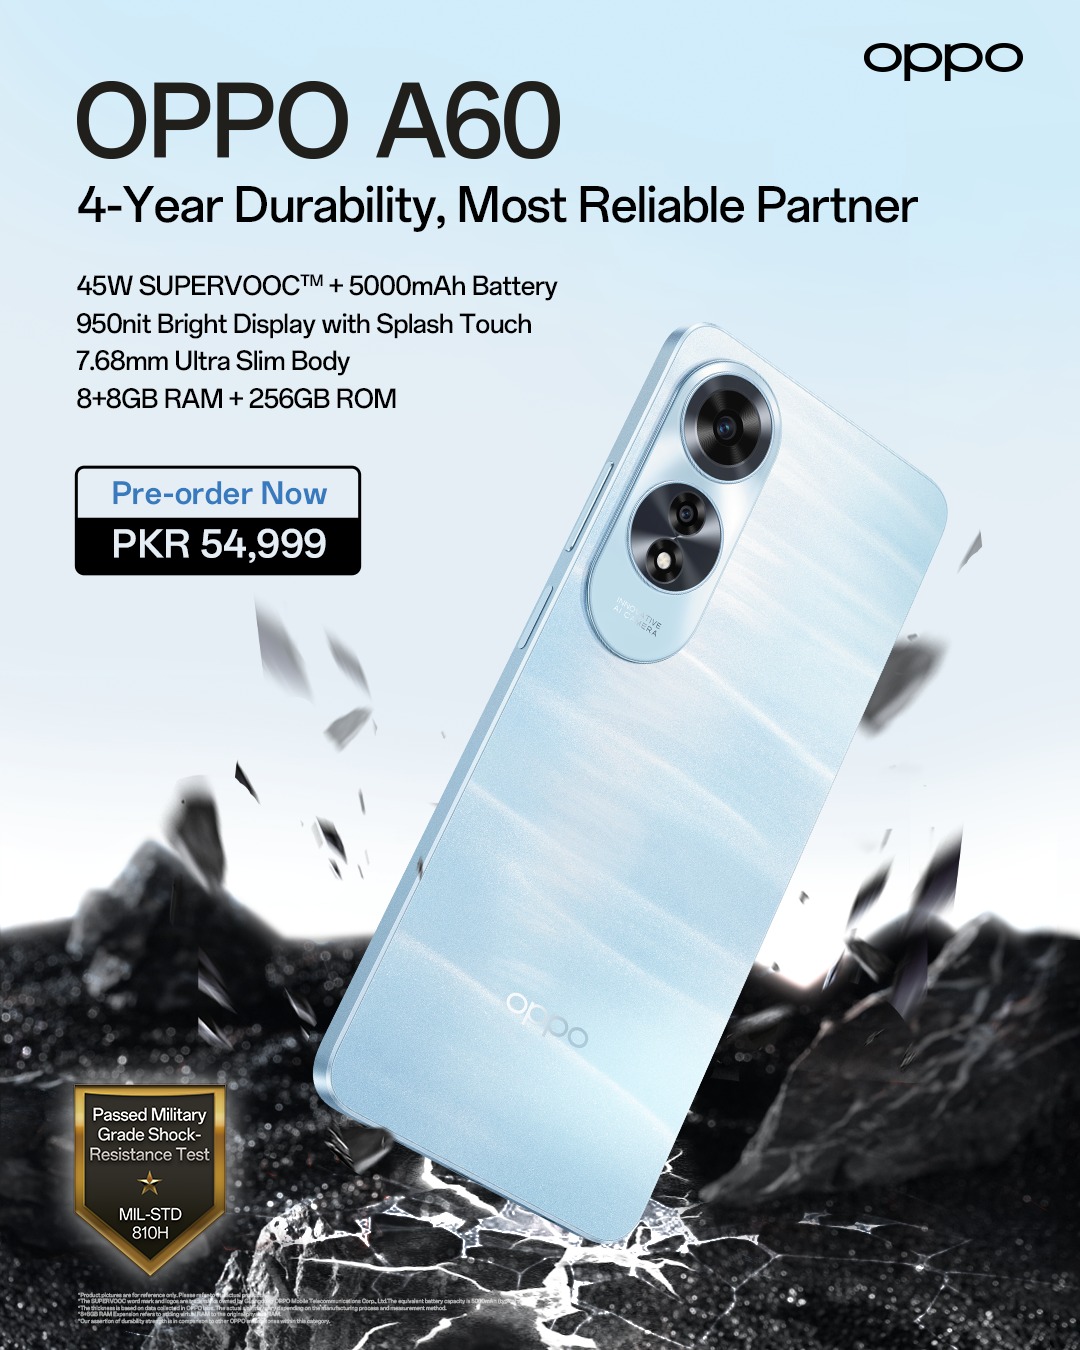 “Get your OPPO A60 Today: Pre-order Your Most Reliable Partner”